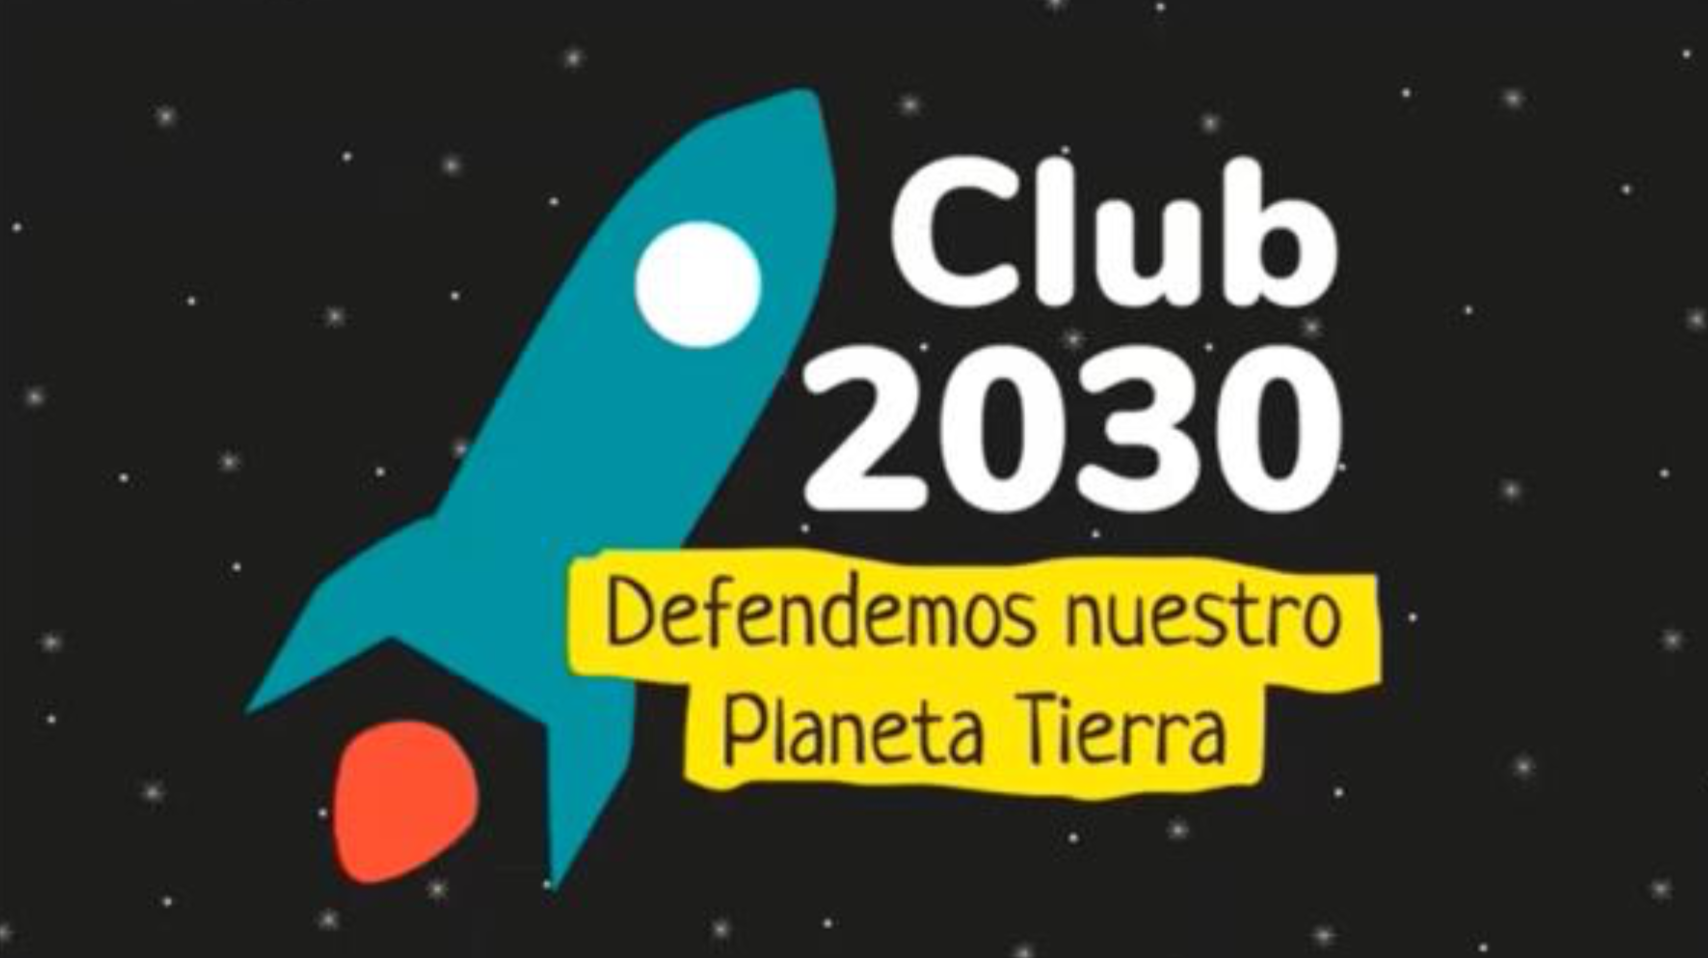 The Global Citizens Club